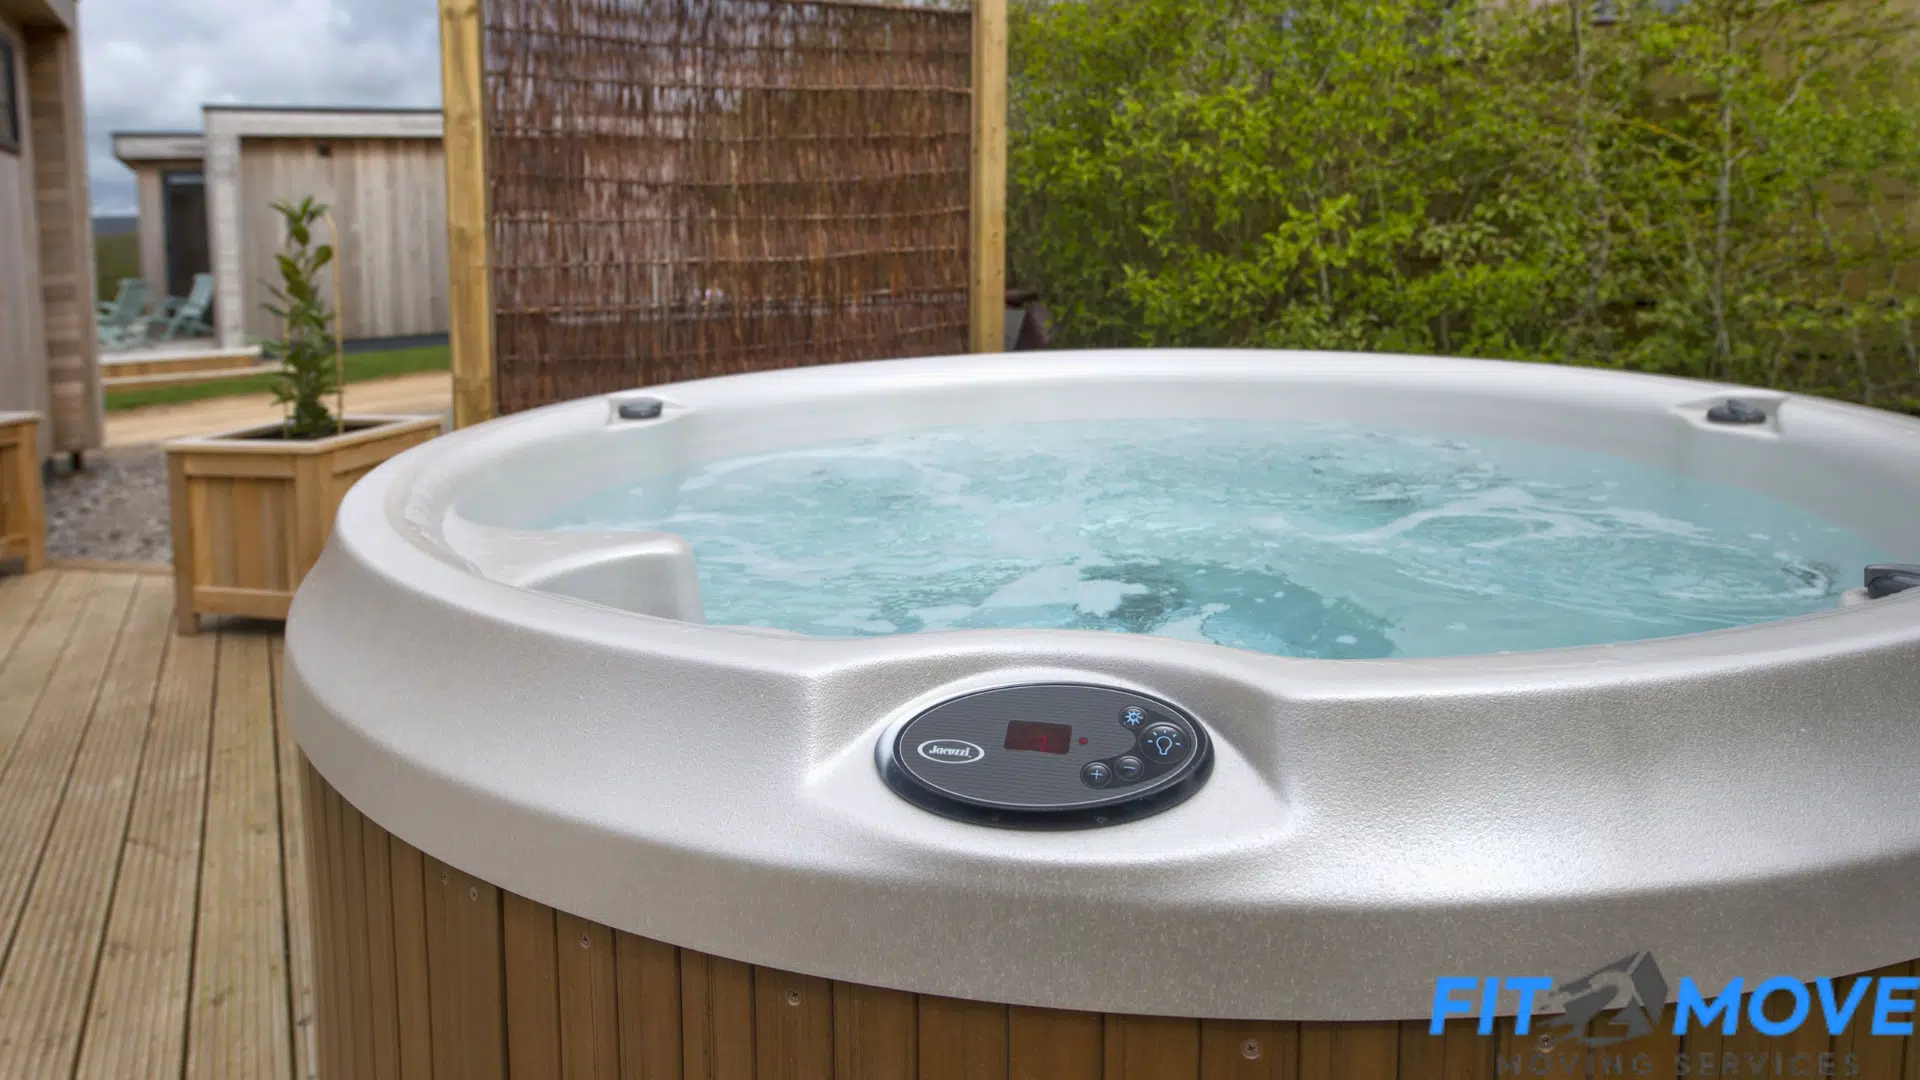 Hot Tub Removal Movers Companies in Dover New Hampshire